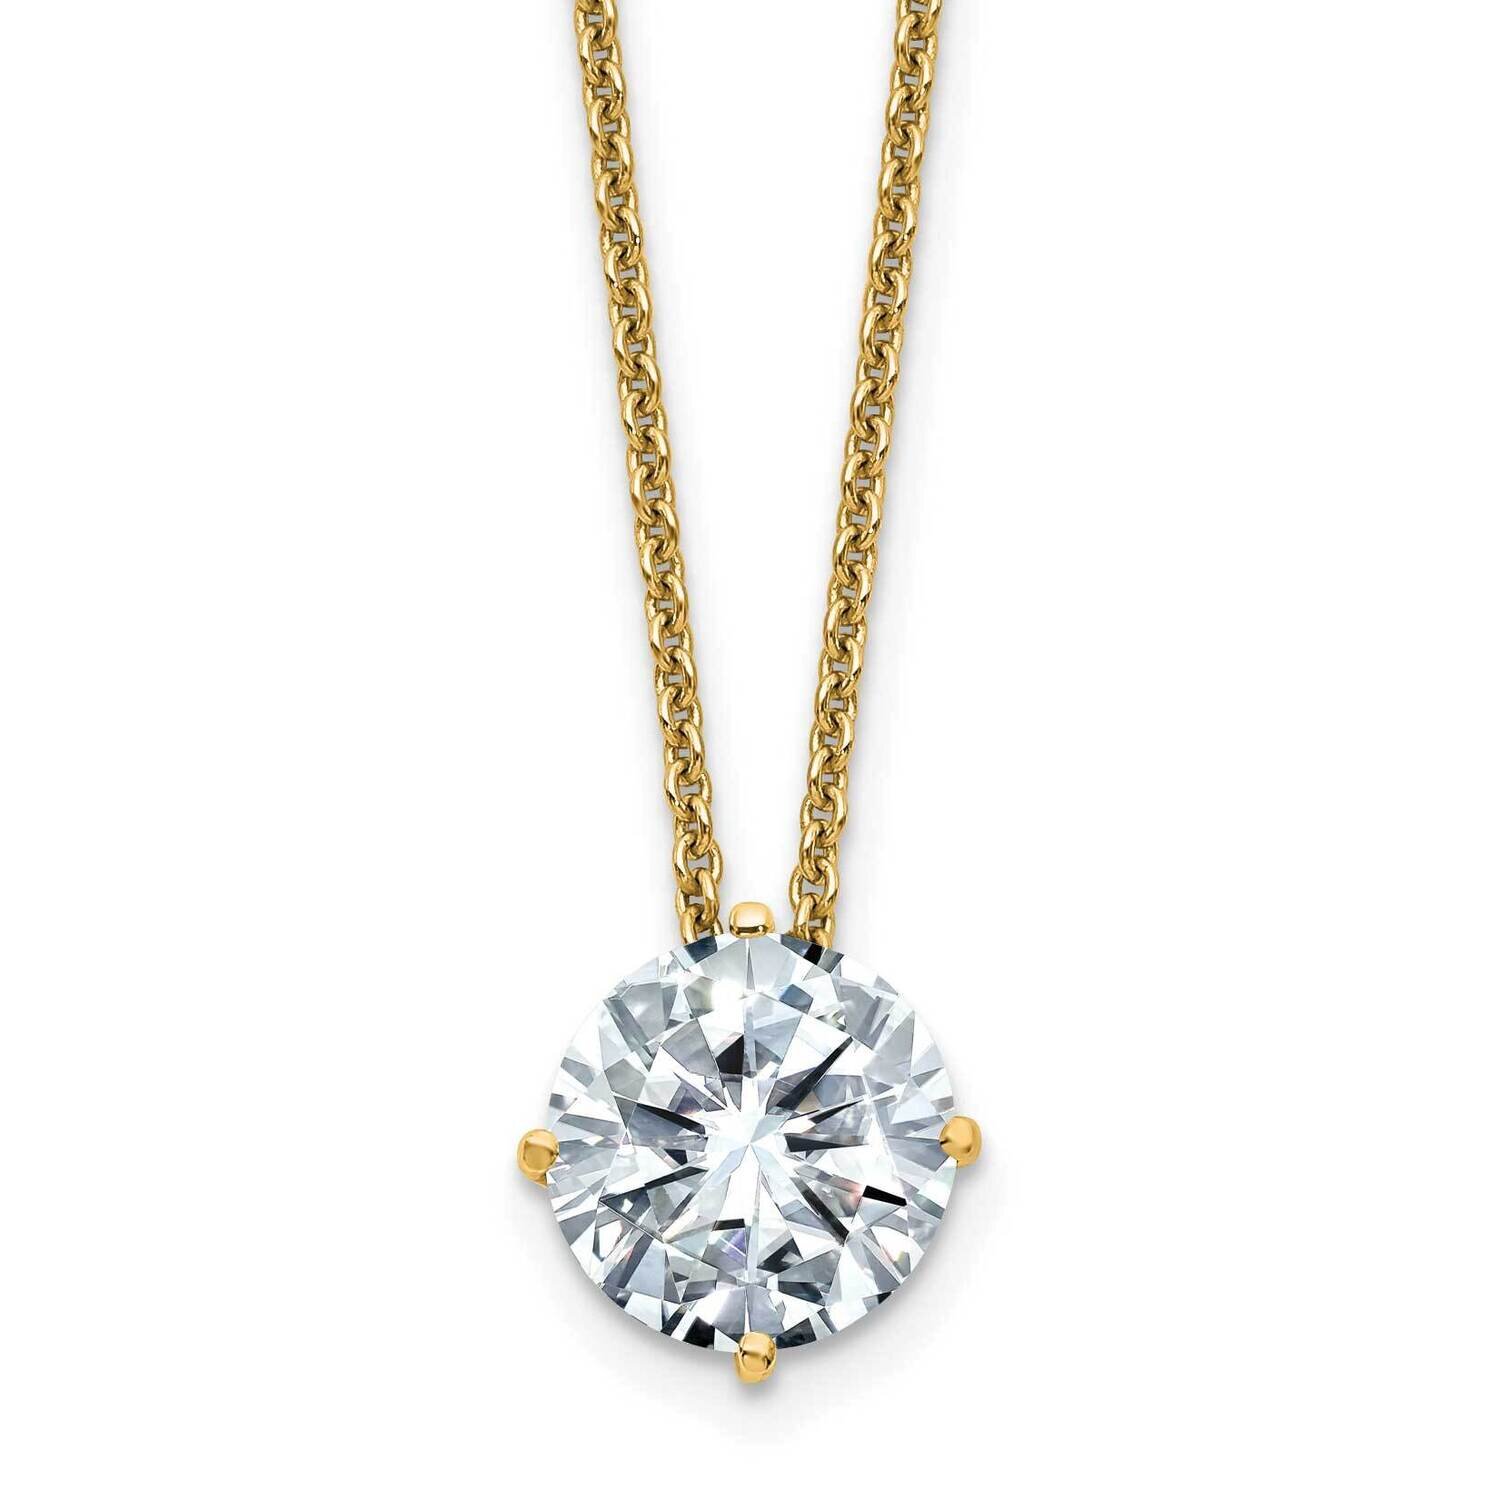 2ct. 8.0mm Round D E F Pure Light Moissanite Solitaire Necklace 14k Gold YG113-25MP